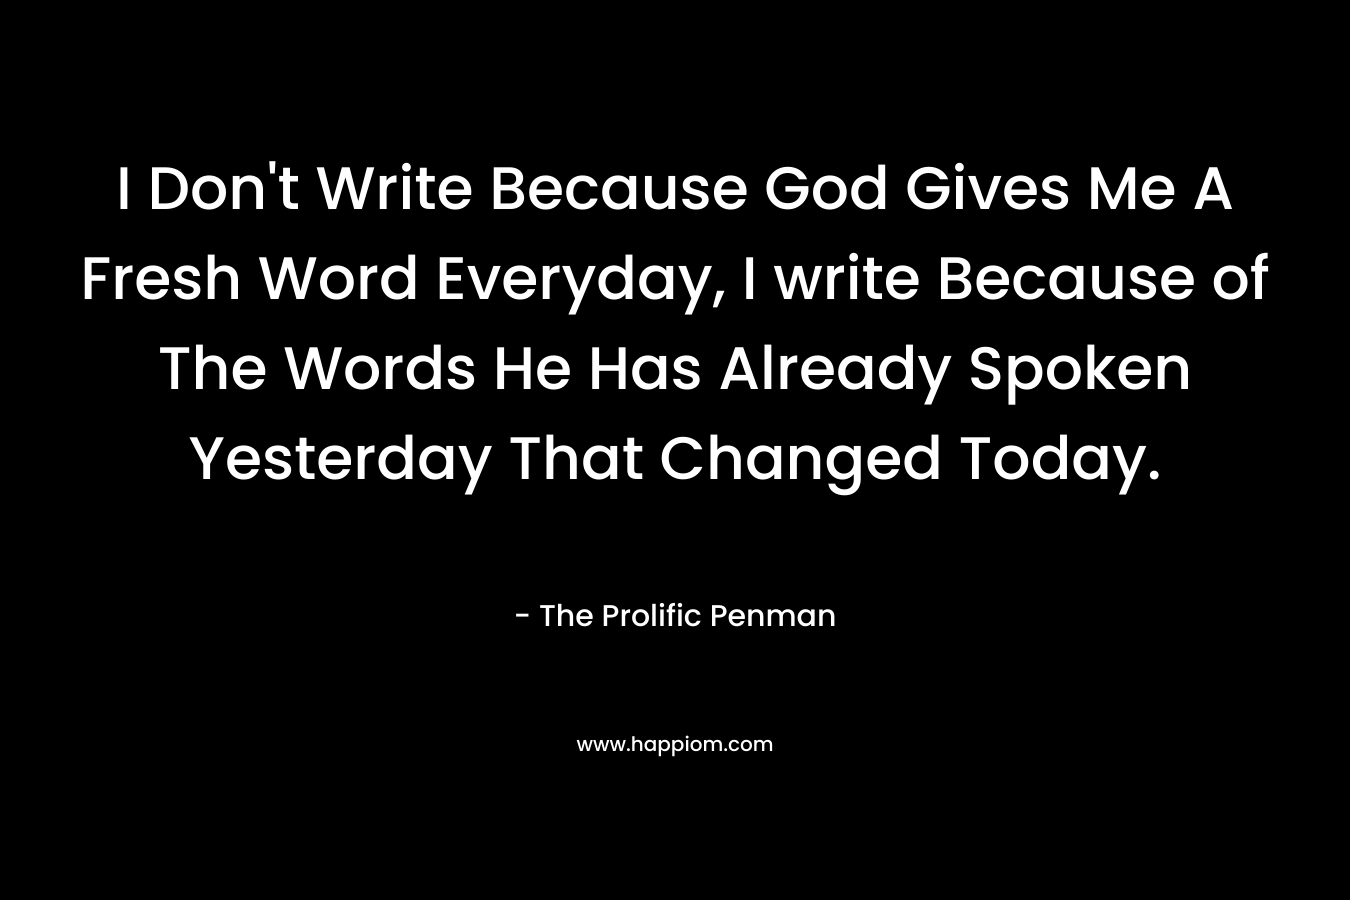 I Don't Write Because God Gives Me A Fresh Word Everyday, I write Because of The Words He Has Already Spoken Yesterday That Changed Today.